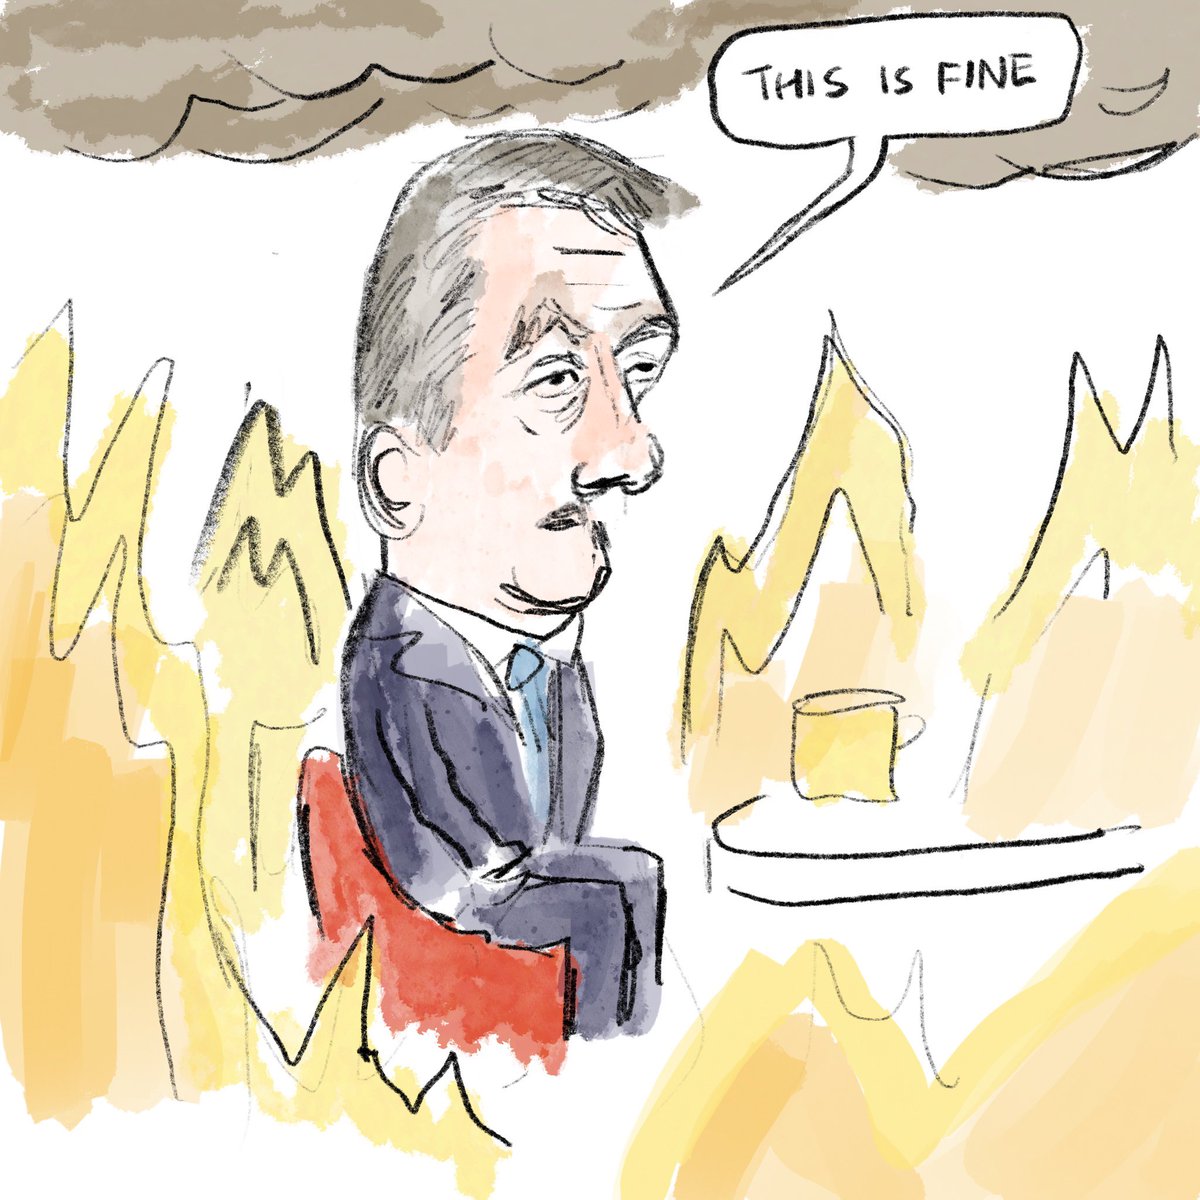 Pointless interview with Mark Harper on #bbclaurak who claimed “This is Fine” a #kuenssberg meme and #sketch